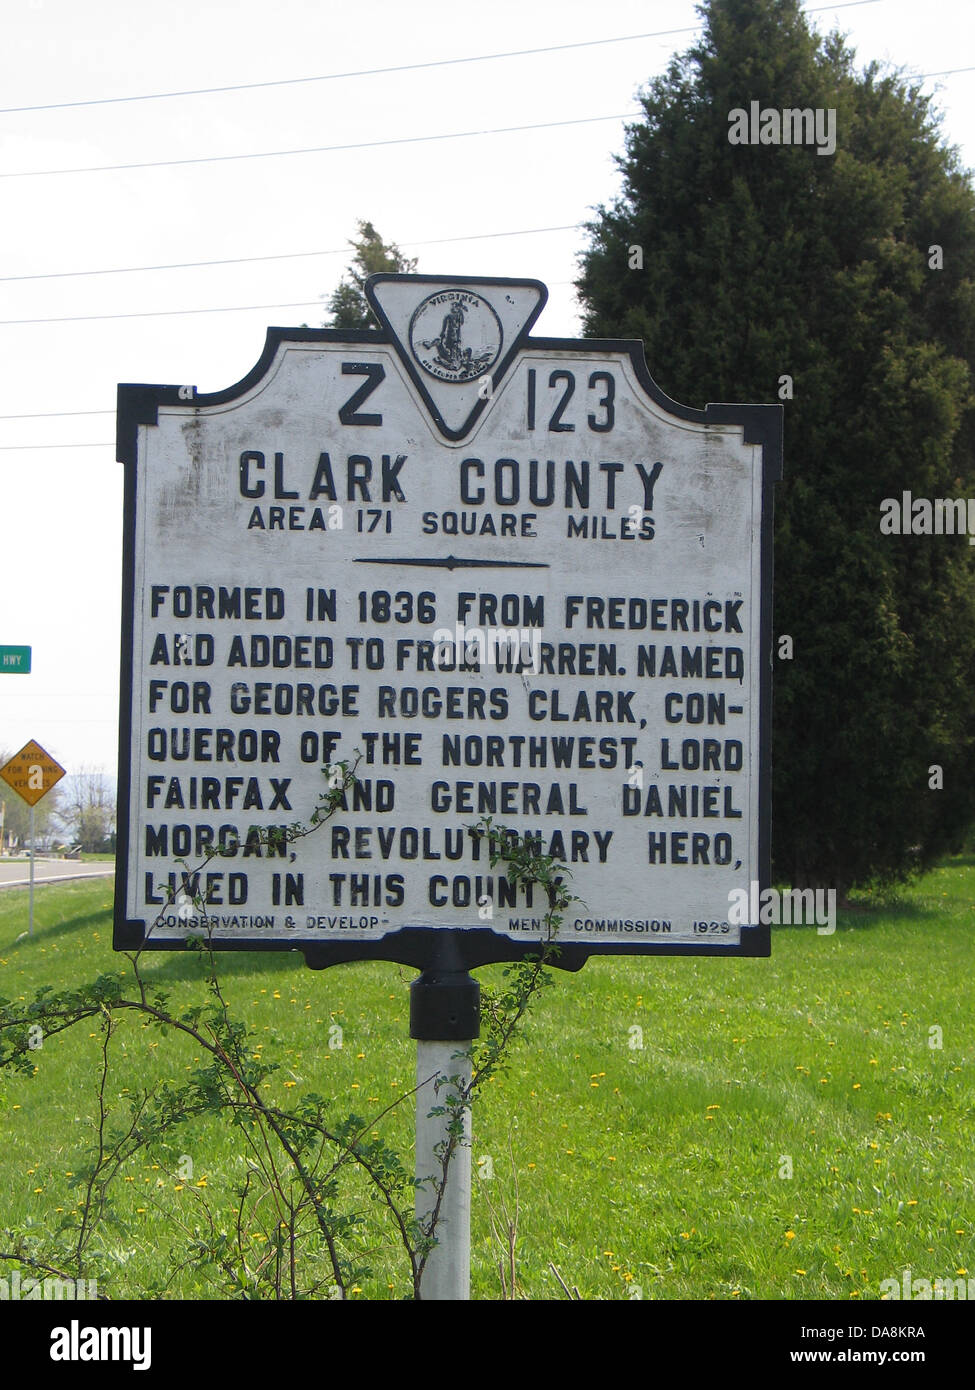 CLARKE COUNTY Area 171 Square Miles Formed in 1836 from Frederick and added to from Warren. Name for George Rogers Clark, Conqueror of the Northwest. Lord Fairfax and General Daniel Morgan, Revolutionary hero, lived in this county. Conservation & Development Commission, 1929. Stock Photo